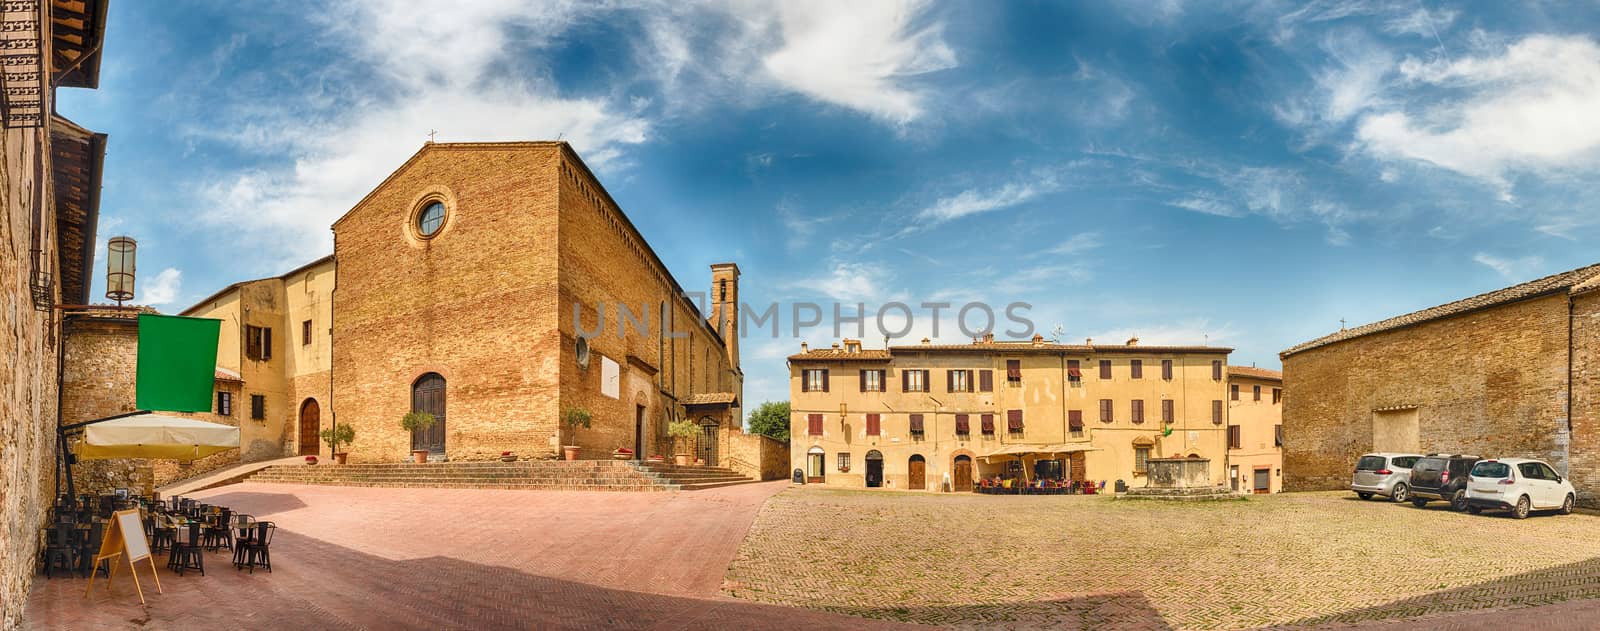 Panoramic view with the Church of Sant'Agostino, landmark in the medieval town of San Gimignano, Tuscany, Italy